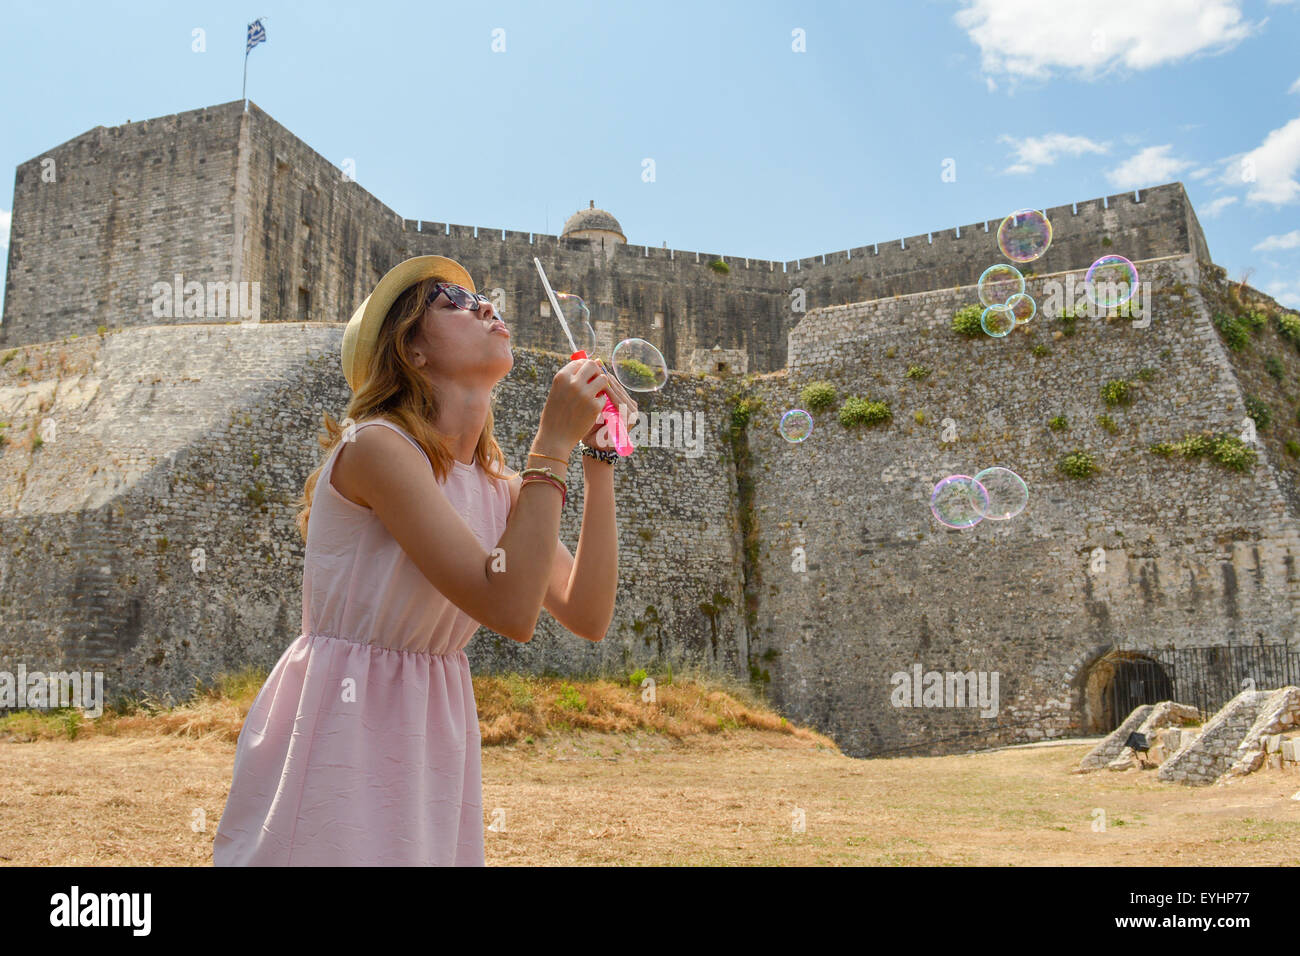 Young girl blowing soap bubbles at the fortress wearing straw hat and pink dress Stock Photo